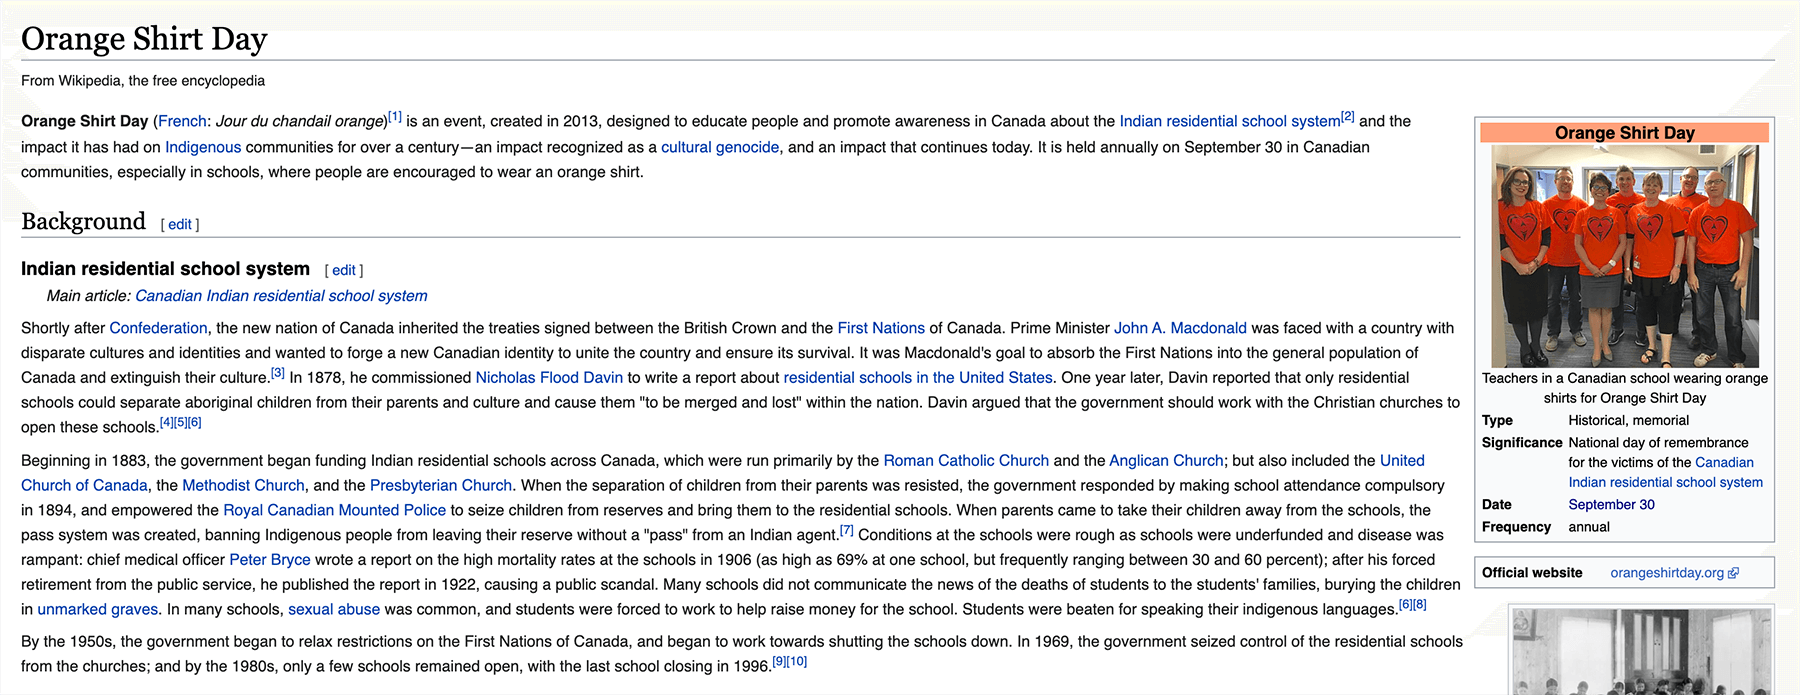 Screenshot of a wikipedia article about Orange Shirt Day, a Canadian event raising awareness about the Indian residential school system. The text is very wide, since it was taken on a large screen.